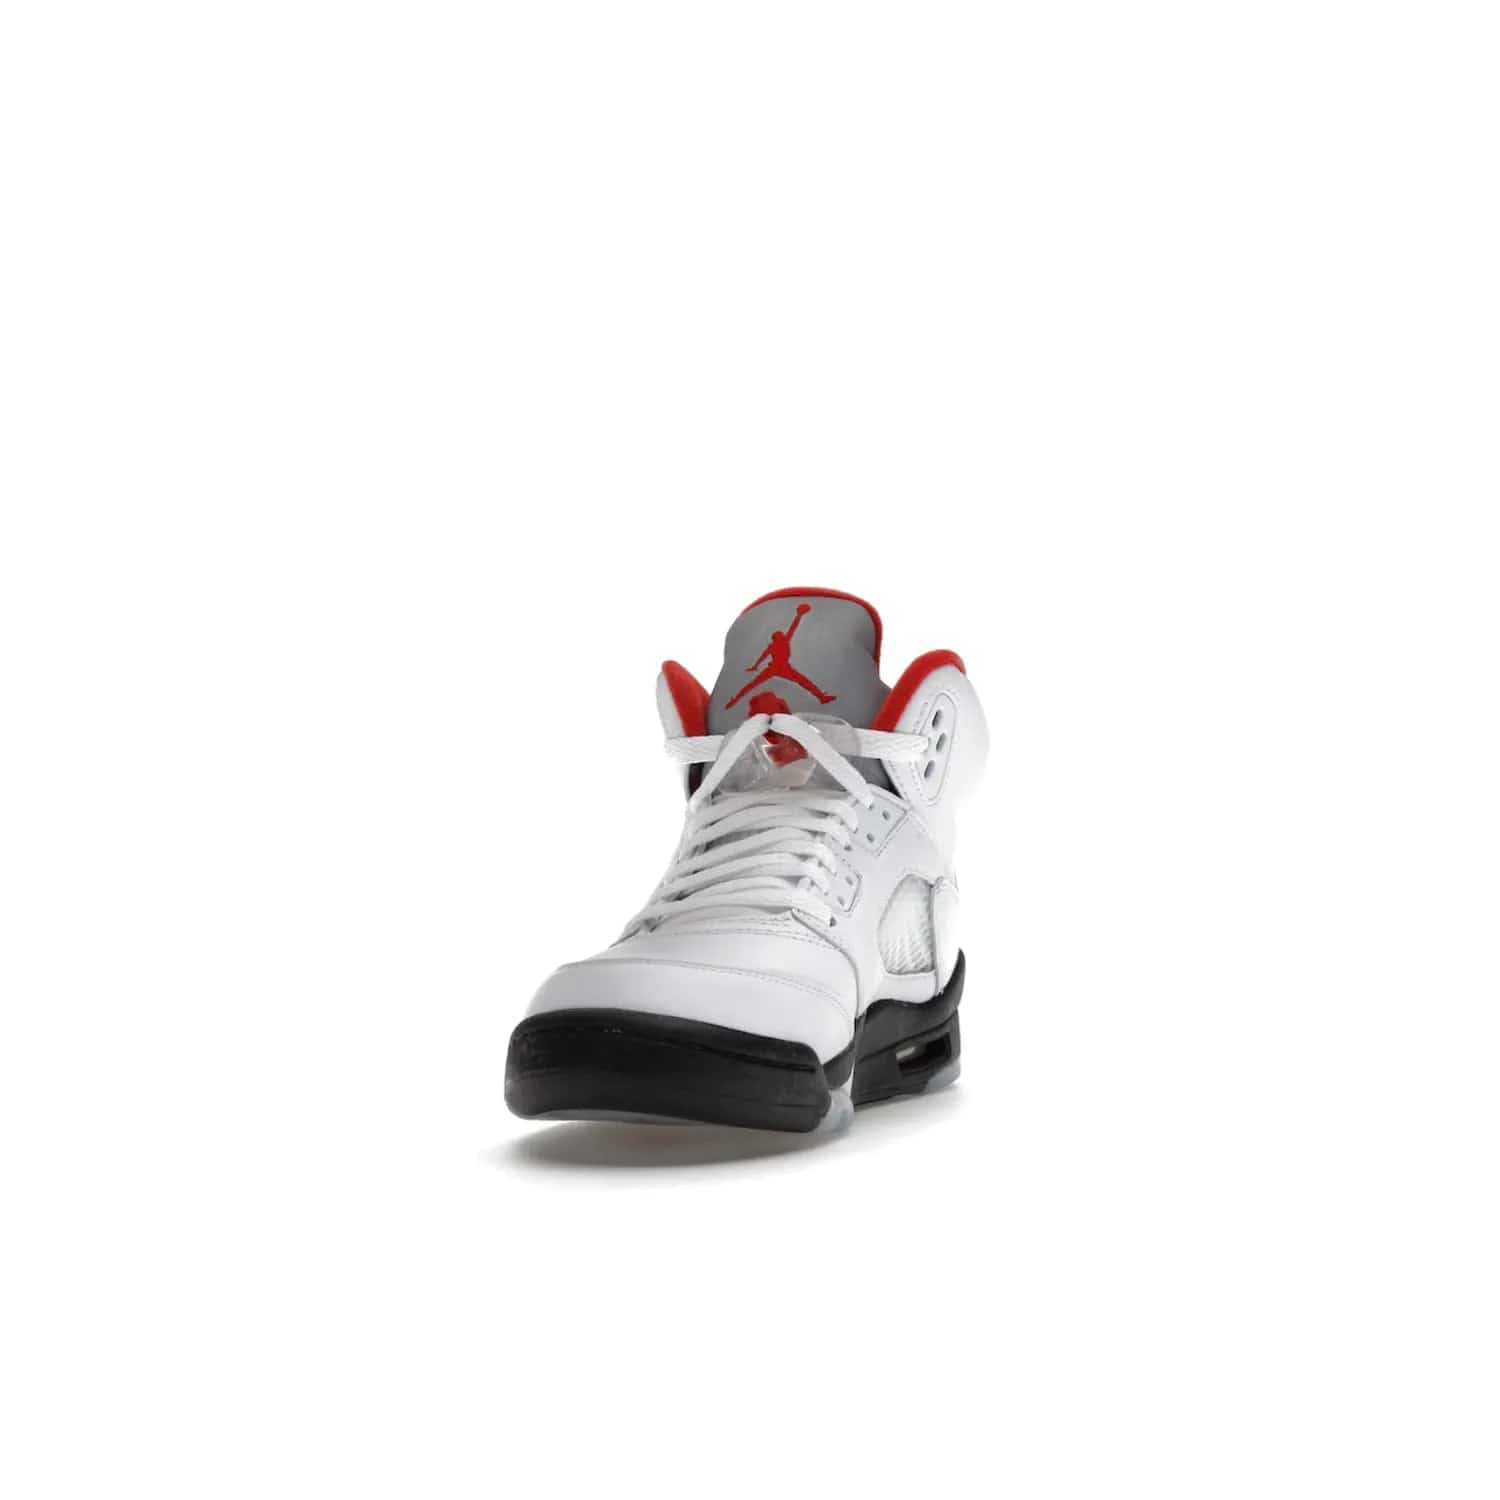 Jordan 5 Retro Fire Red Silver Tongue (2020) (GS) - Image 12 - Only at www.BallersClubKickz.com - A stylish option for any grade schooler. The Air Jordan 5 Retro Fire Red Silver Tongue 2020 GS features a combination of four hues, premium white leather, a clear mesh mid-upper and a reflective silver tongue. An icy translucent blue outsole completes the look. Available on May 2, $150.